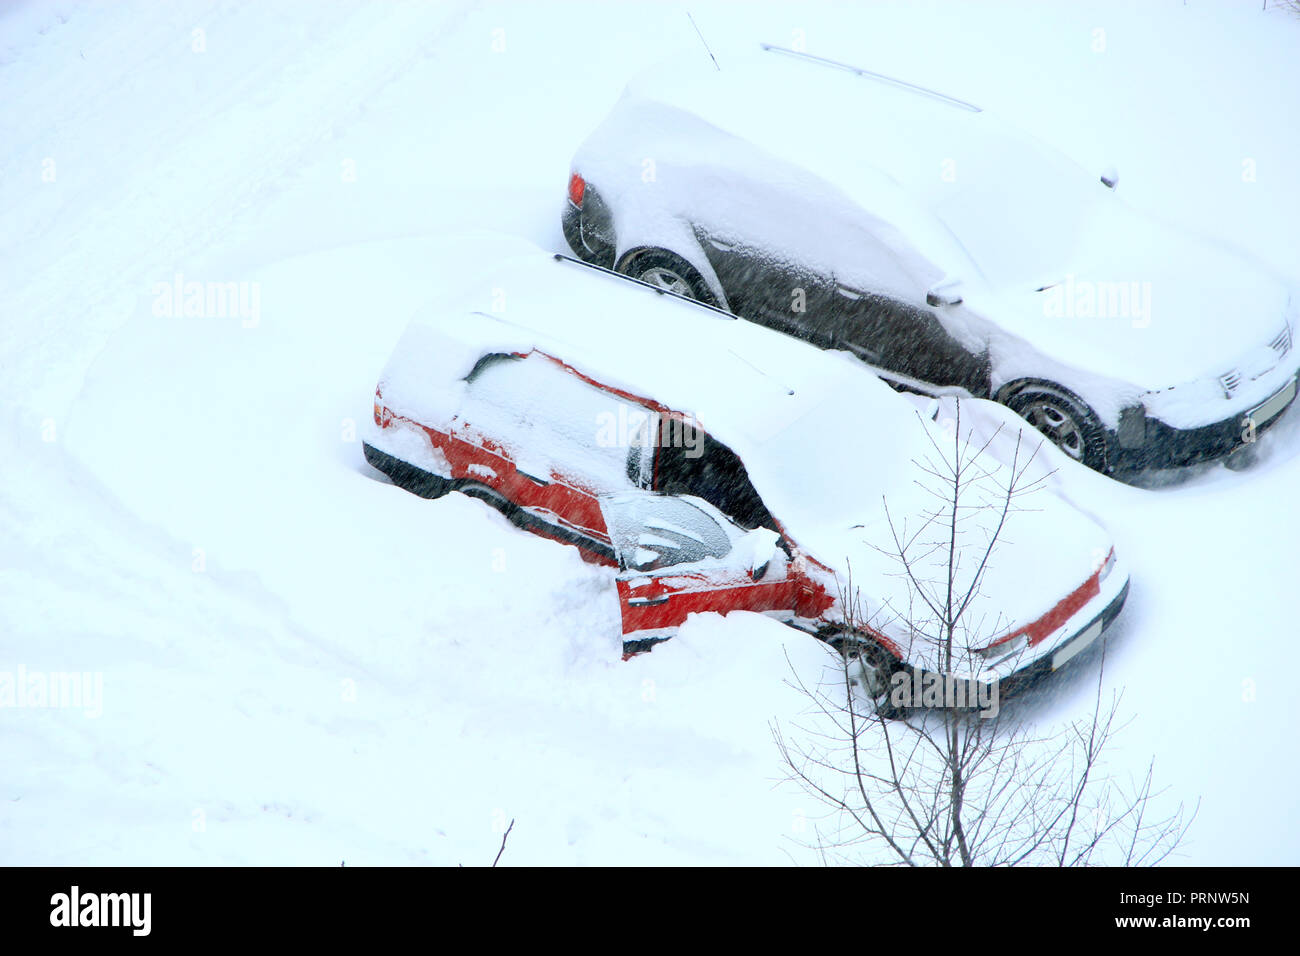 Man trying to free his car from snowy captivity. Parked cars covered with snow. Bad weather in town. Snowy day. Urban scene. Weather concept. Automobi Stock Photo